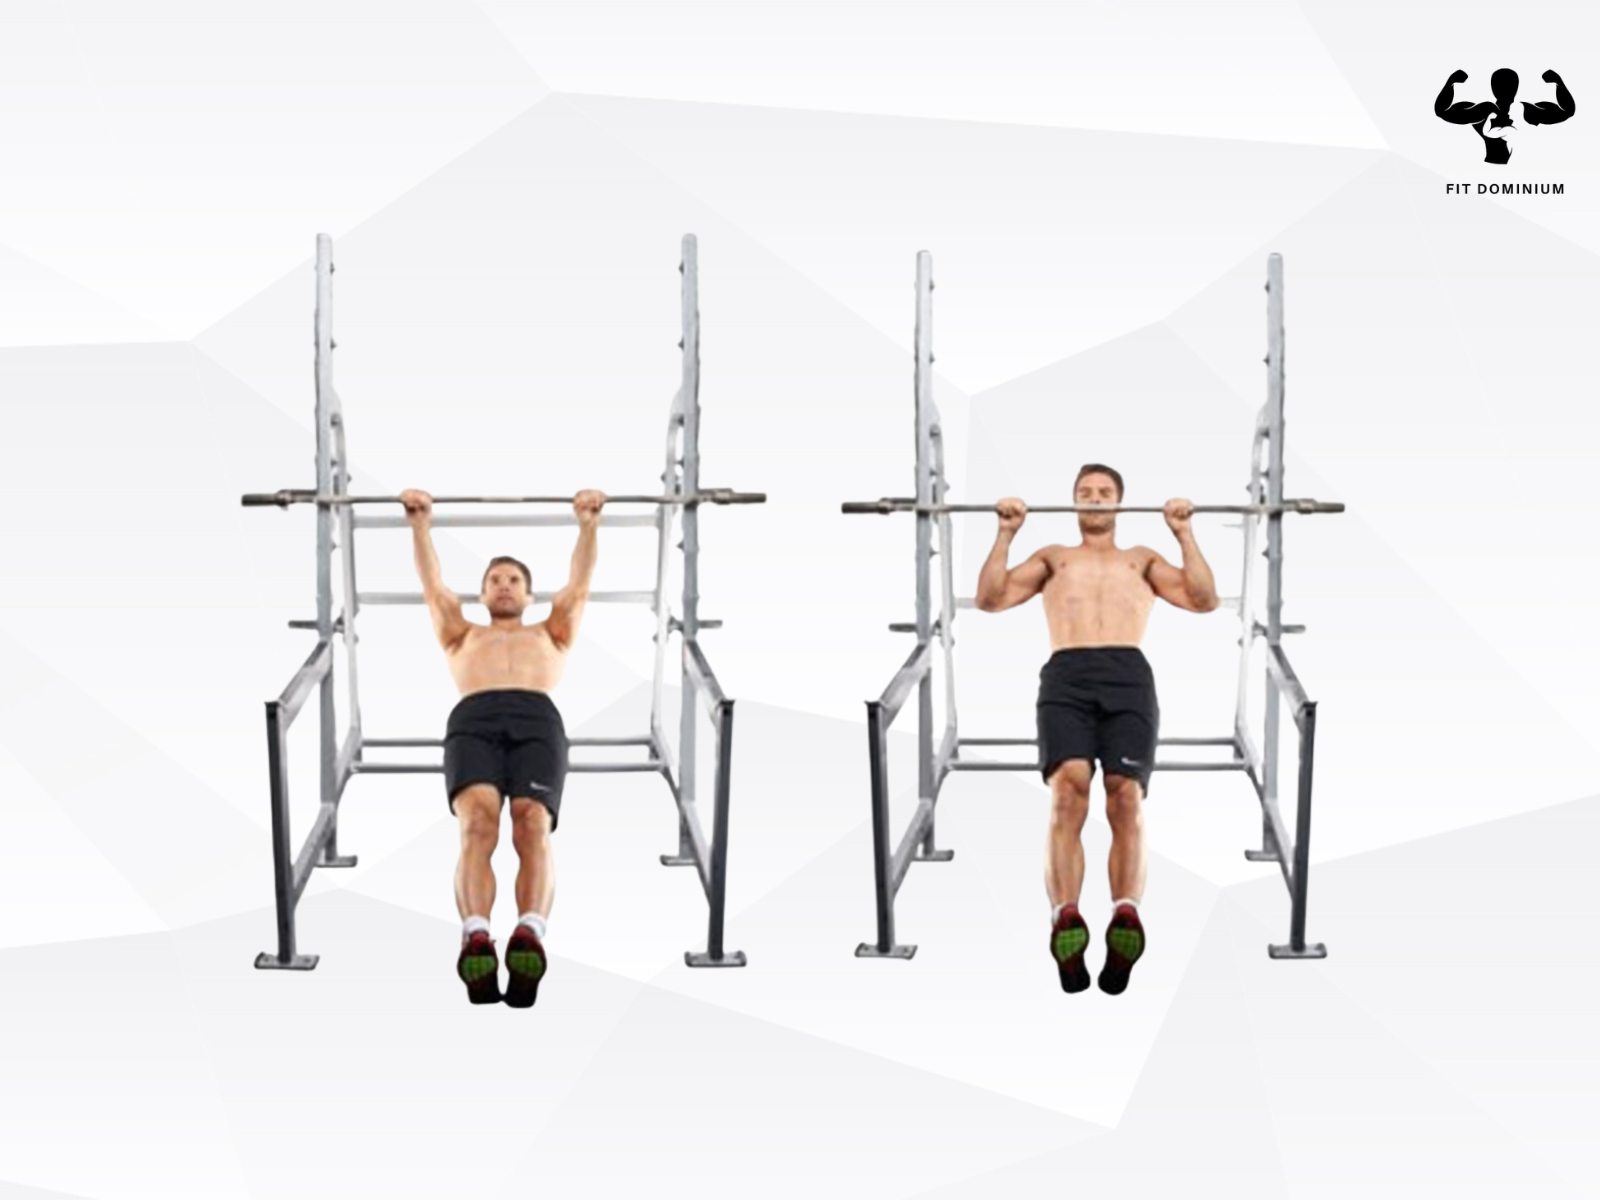 Inverted Row: How To & Benefits | FitDominium